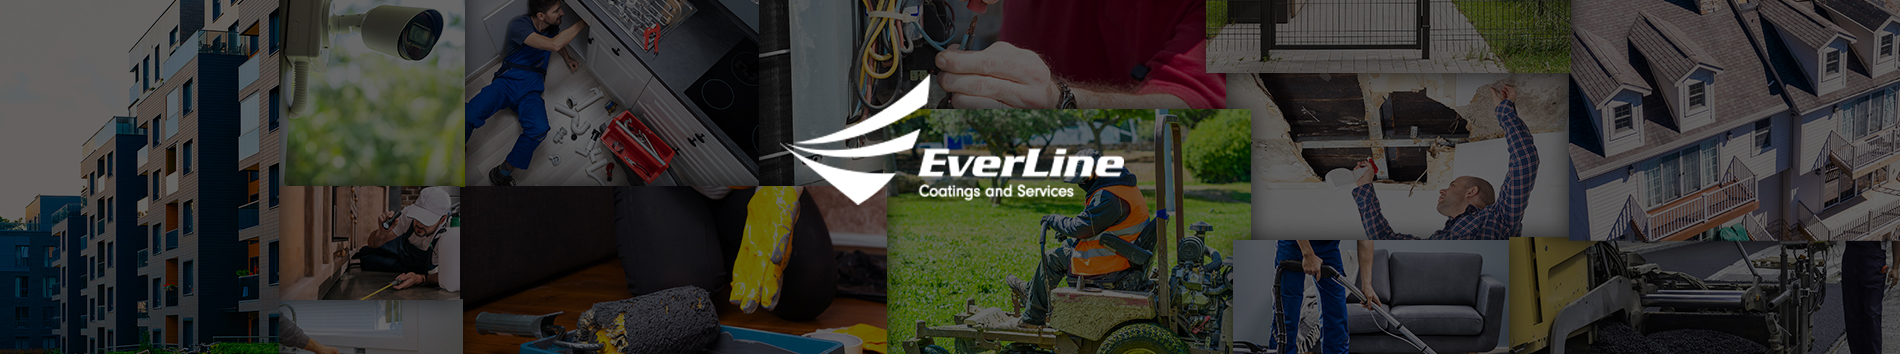 Everline Coatings & Services